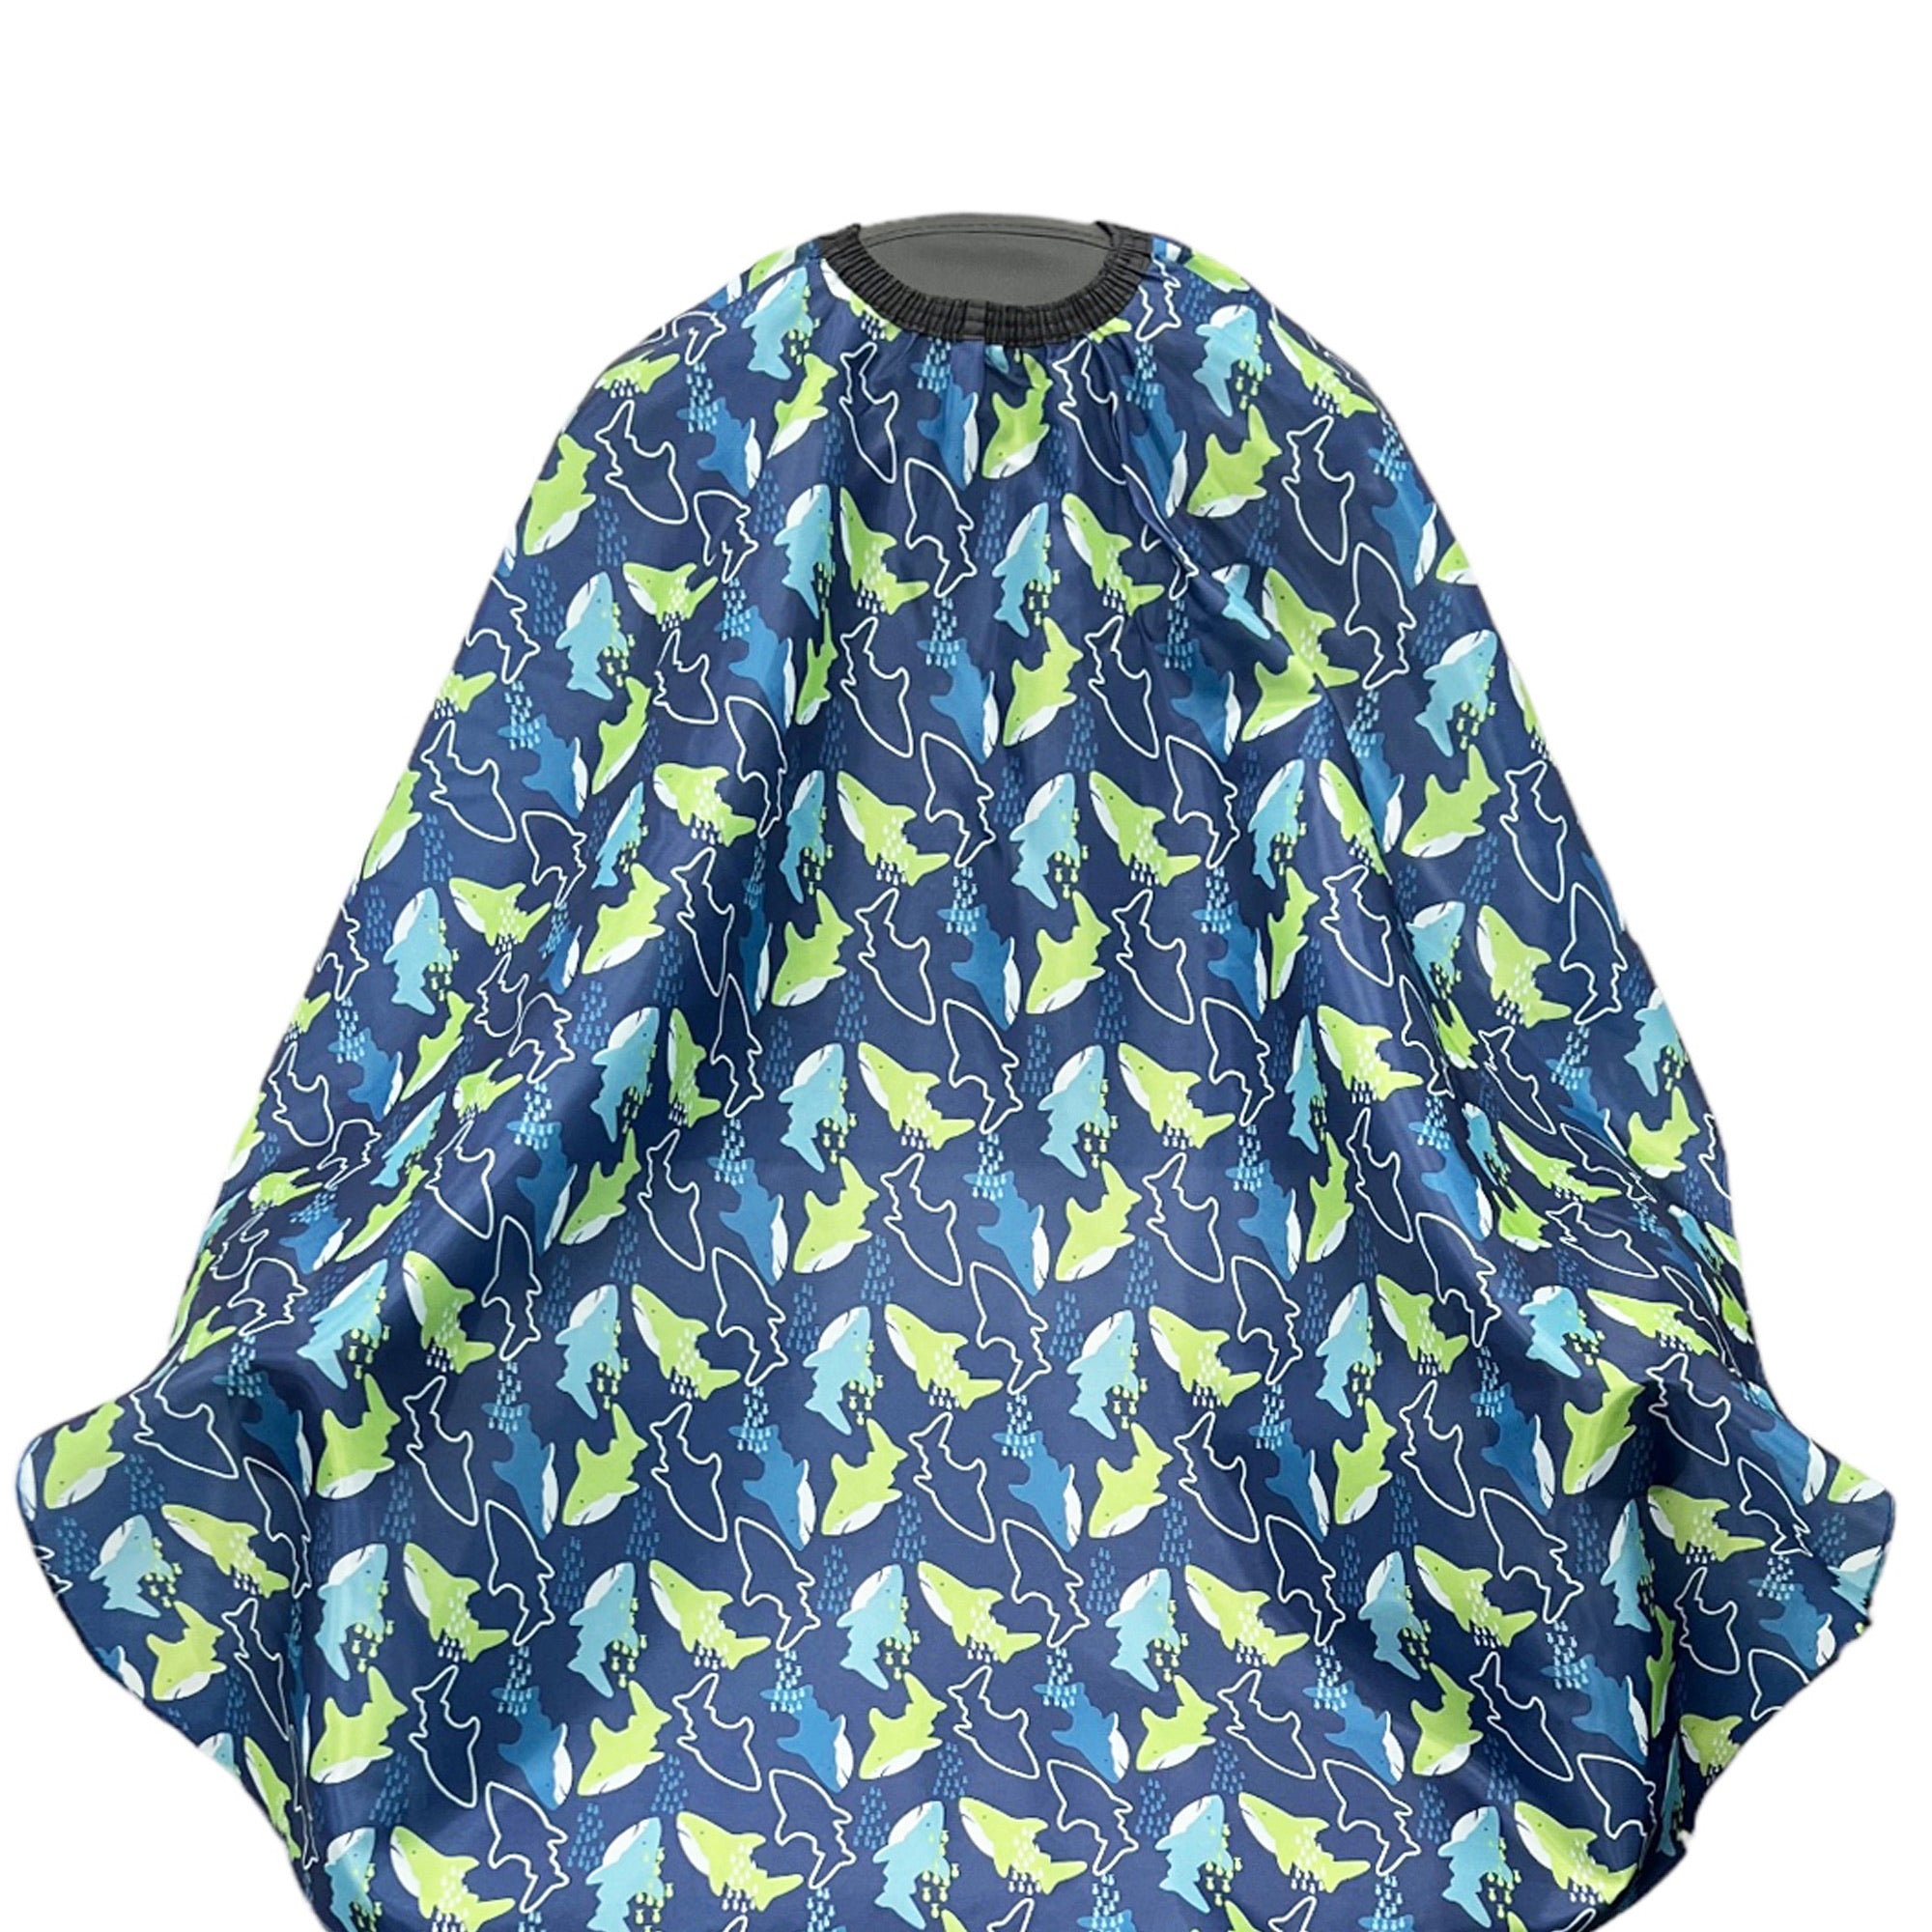 Gabri - Barber Hairdressing Kids Hair Cutting Capes & Gowns Shark Pattern